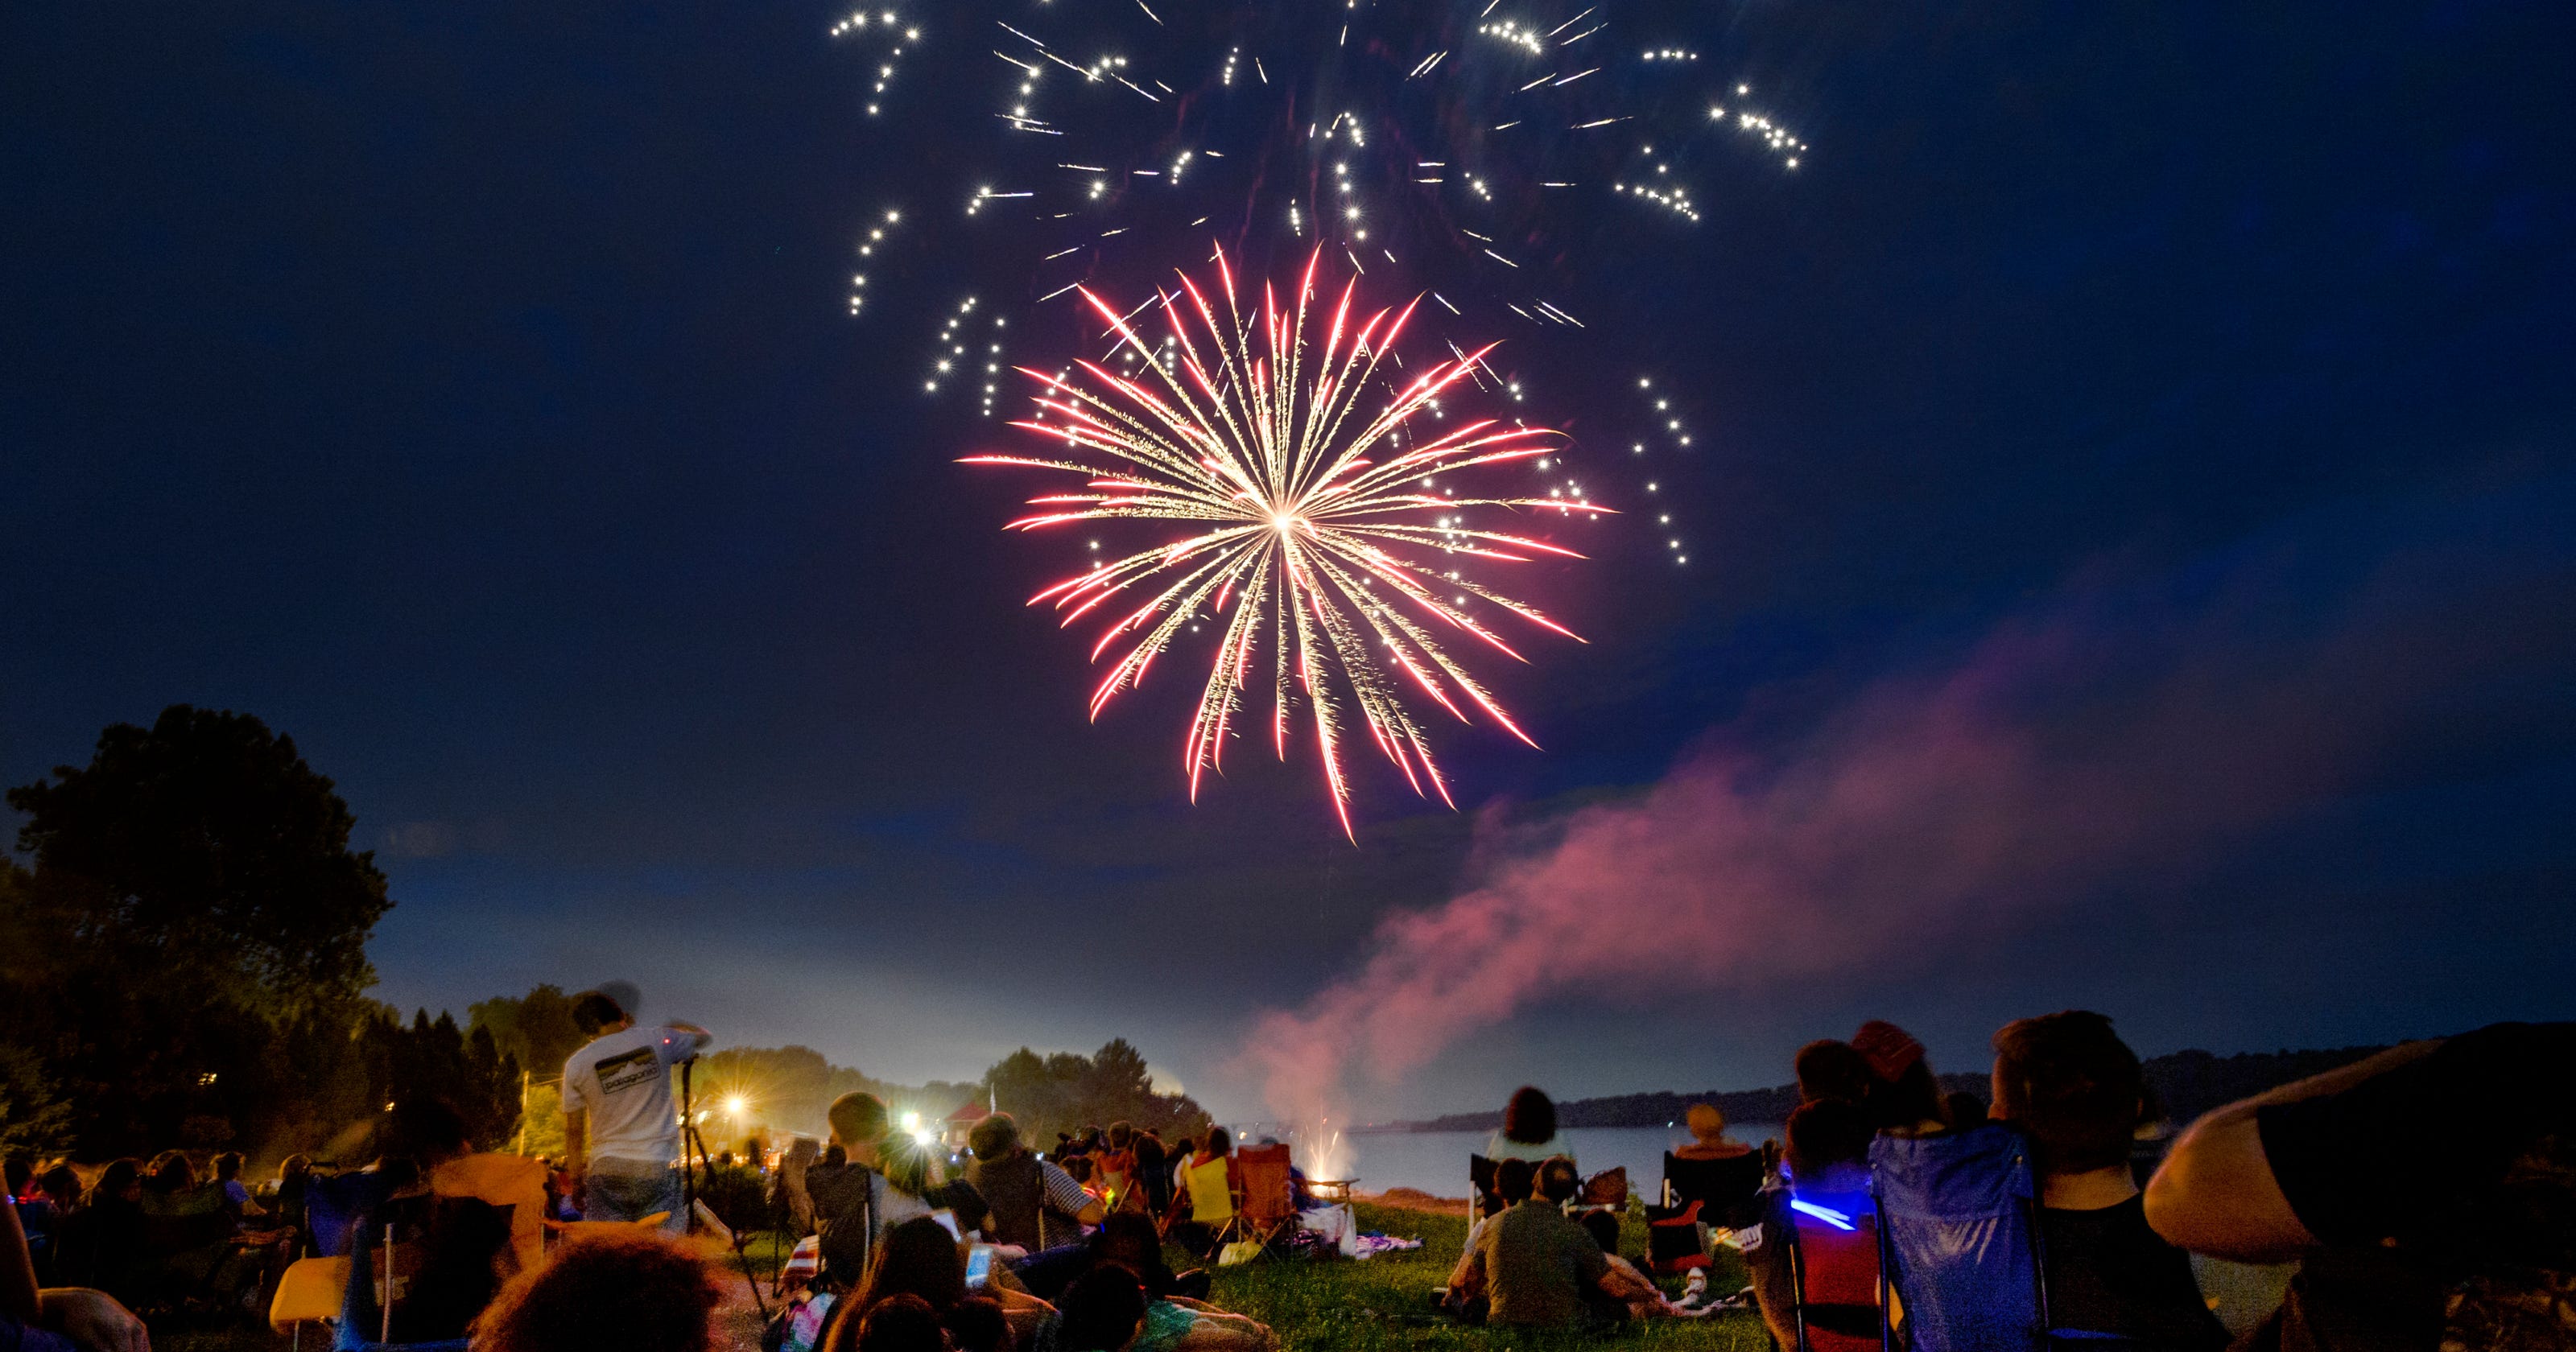 Newburgh fireworks show rescheduled due to high water levels